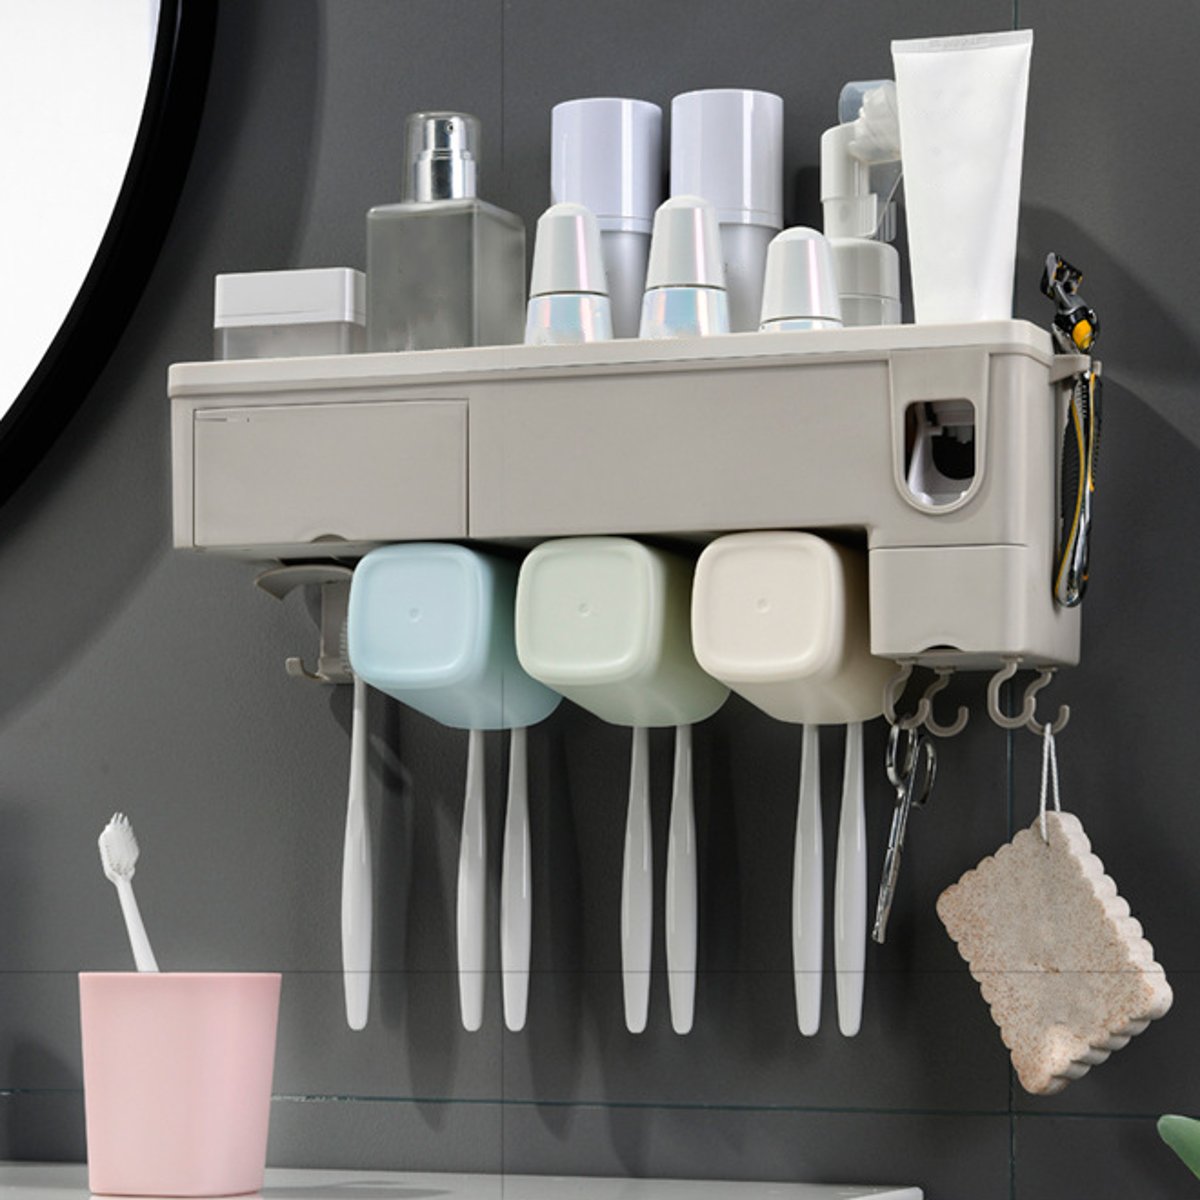 Wall-Mounted-Toothbrush-Holder-Automatic-Toothpaste-Squeezer-Storage-Rack-Cup-Family-Set-1675842-1